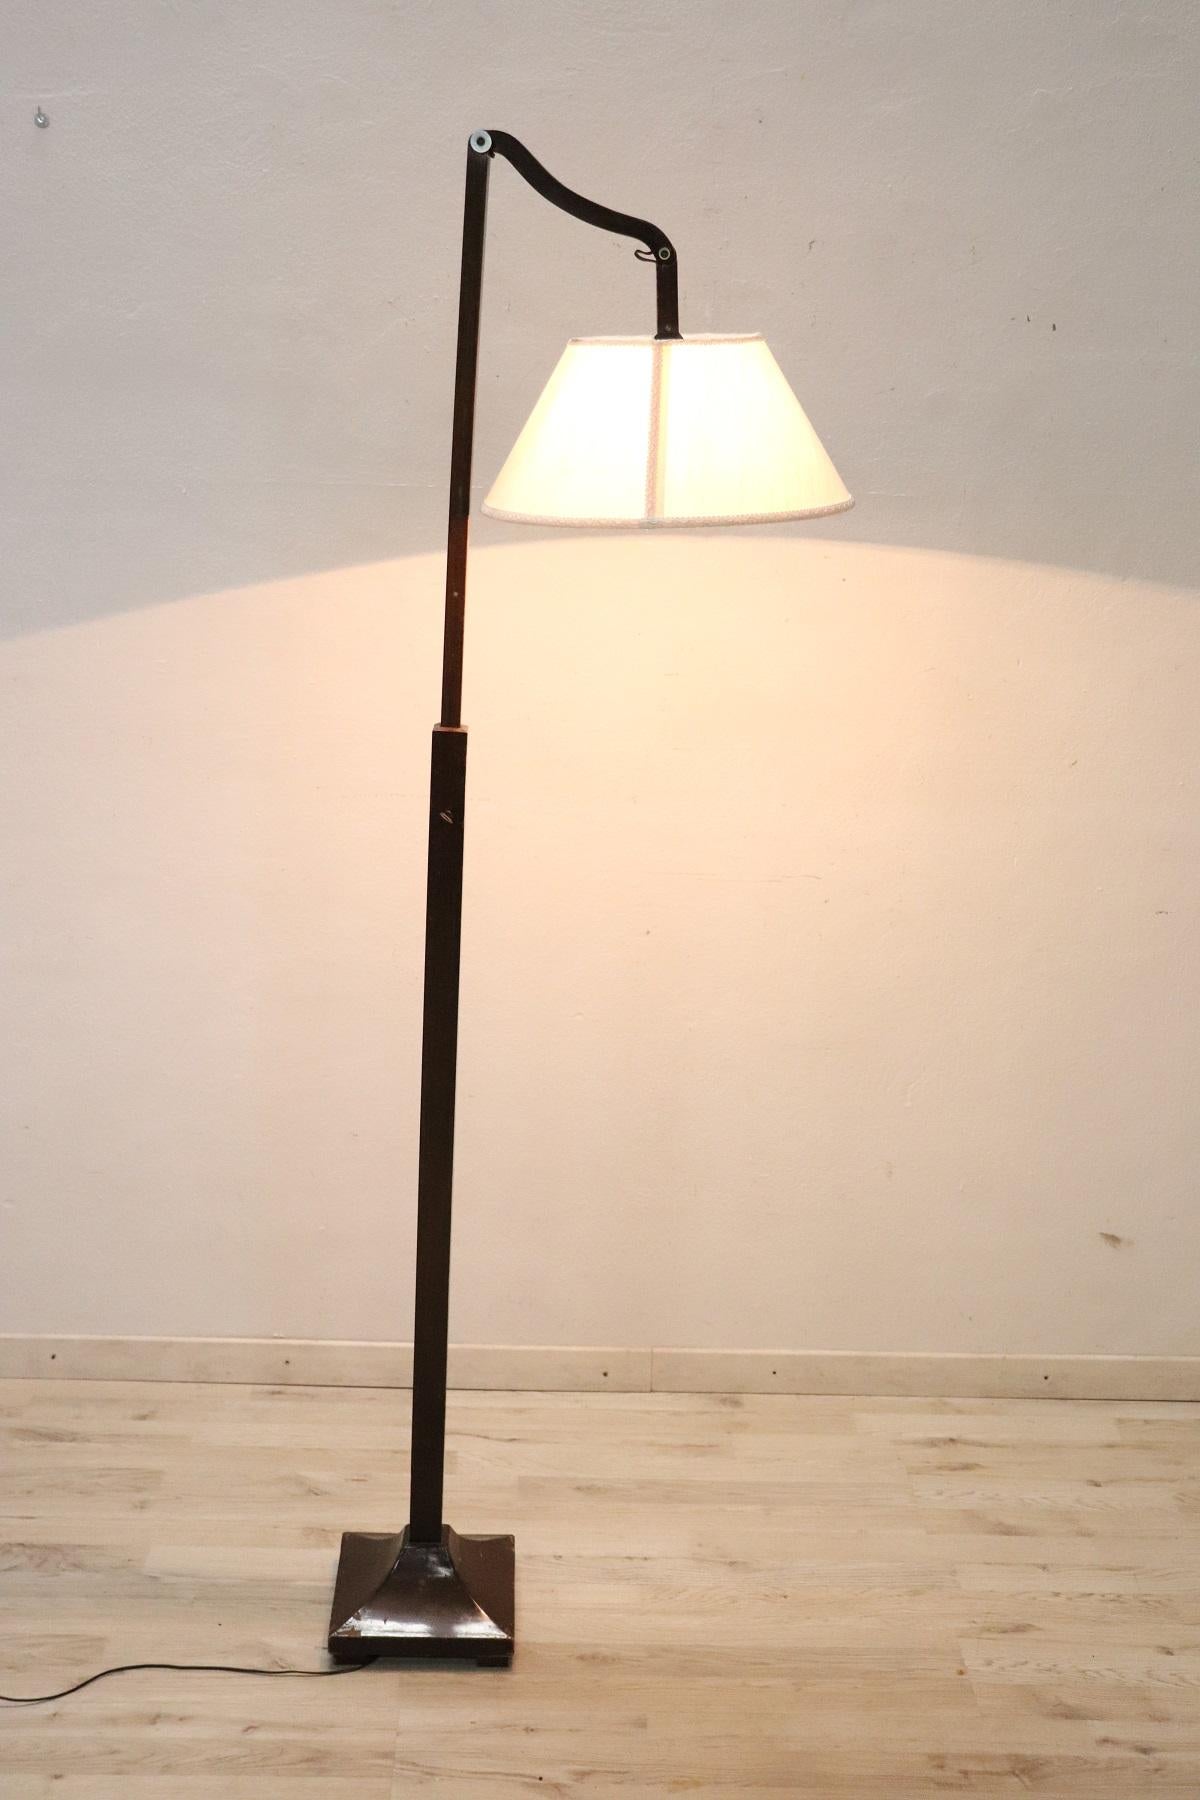 Beautiful floor lamp in wood. This lamp is adjustable in height (max cm 200 inch 78.74) and the arm with the light can be moved. Fantastic good vintage conditions. Some signs of wear at the base.